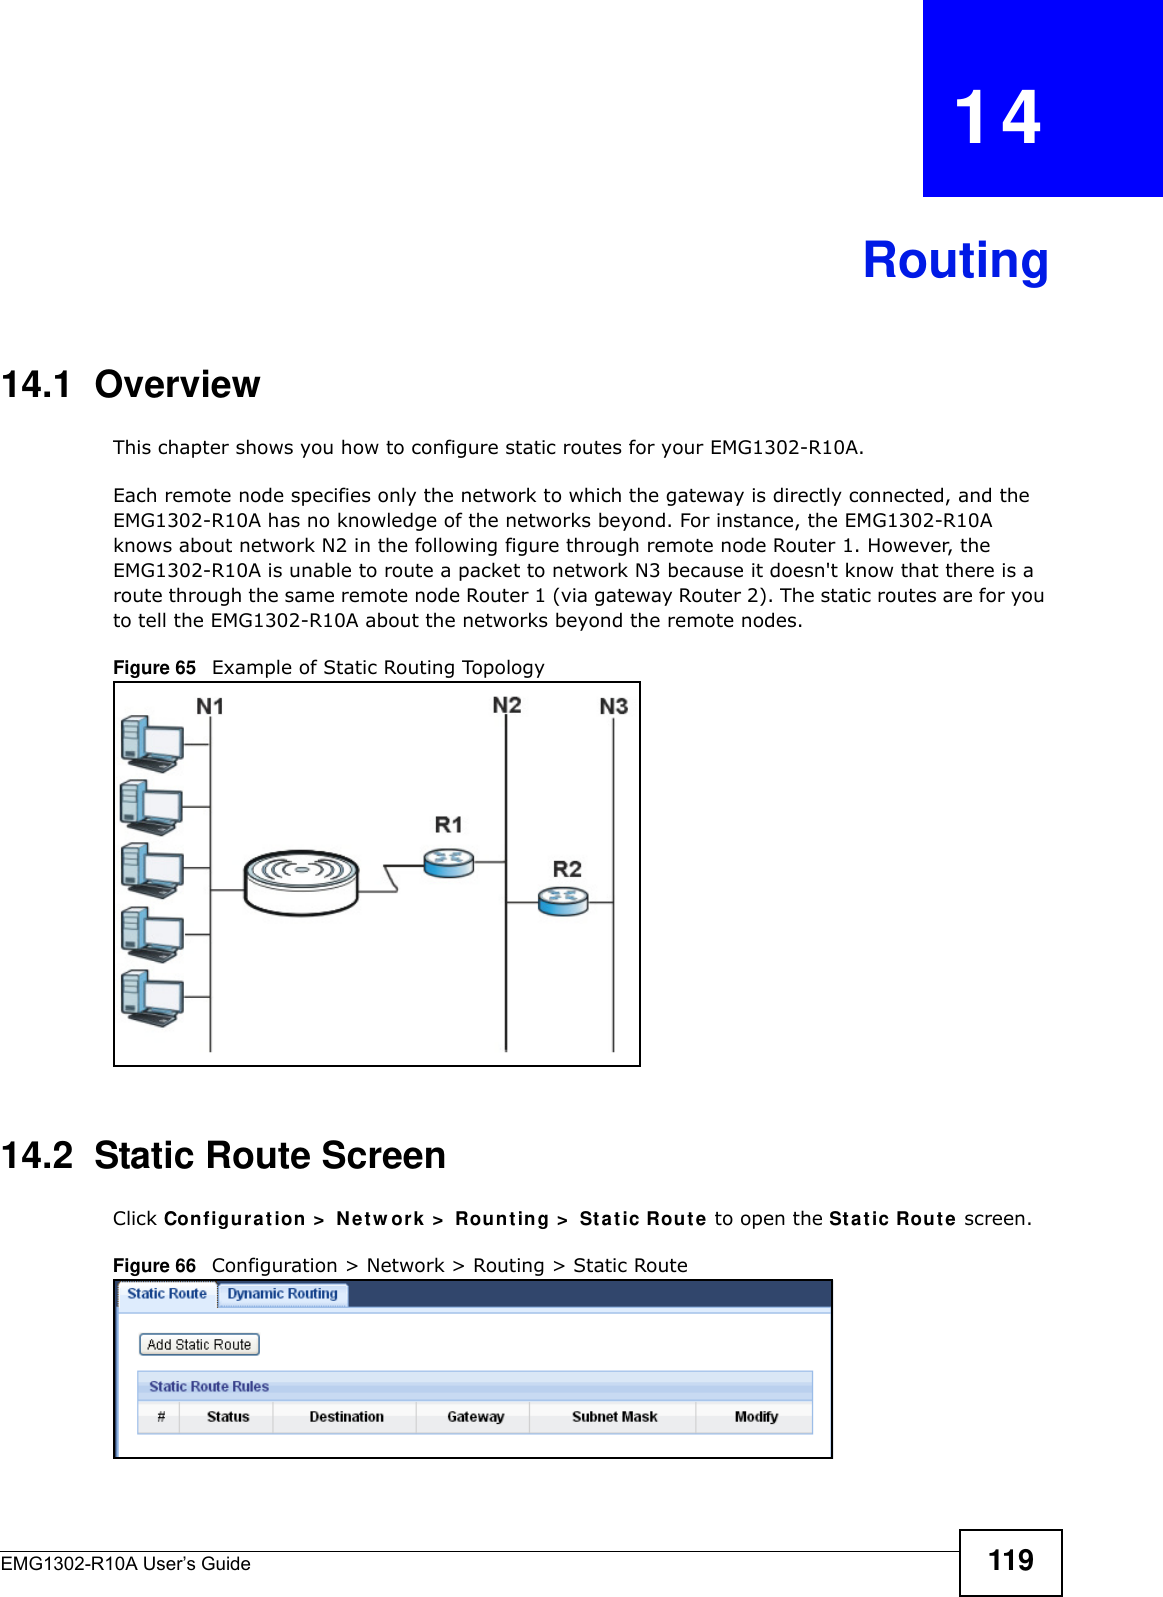 EMG1302-R10A User’s Guide 119CHAPTER   14Routing14.1  Overview   This chapter shows you how to configure static routes for your EMG1302-R10A.Each remote node specifies only the network to which the gateway is directly connected, and the EMG1302-R10A has no knowledge of the networks beyond. For instance, the EMG1302-R10A knows about network N2 in the following figure through remote node Router 1. However, the EMG1302-R10A is unable to route a packet to network N3 because it doesn&apos;t know that there is a route through the same remote node Router 1 (via gateway Router 2). The static routes are for you to tell the EMG1302-R10A about the networks beyond the remote nodes.Figure 65   Example of Static Routing Topology14.2  Static Route ScreenClick Configu r at ion &gt;  Net w ork  &gt;  Rount in g &gt;  Sta t ic Rout e  to open the St at ic Rout e screen. Figure 66   Configuration &gt; Network &gt; Routing &gt; Static Route